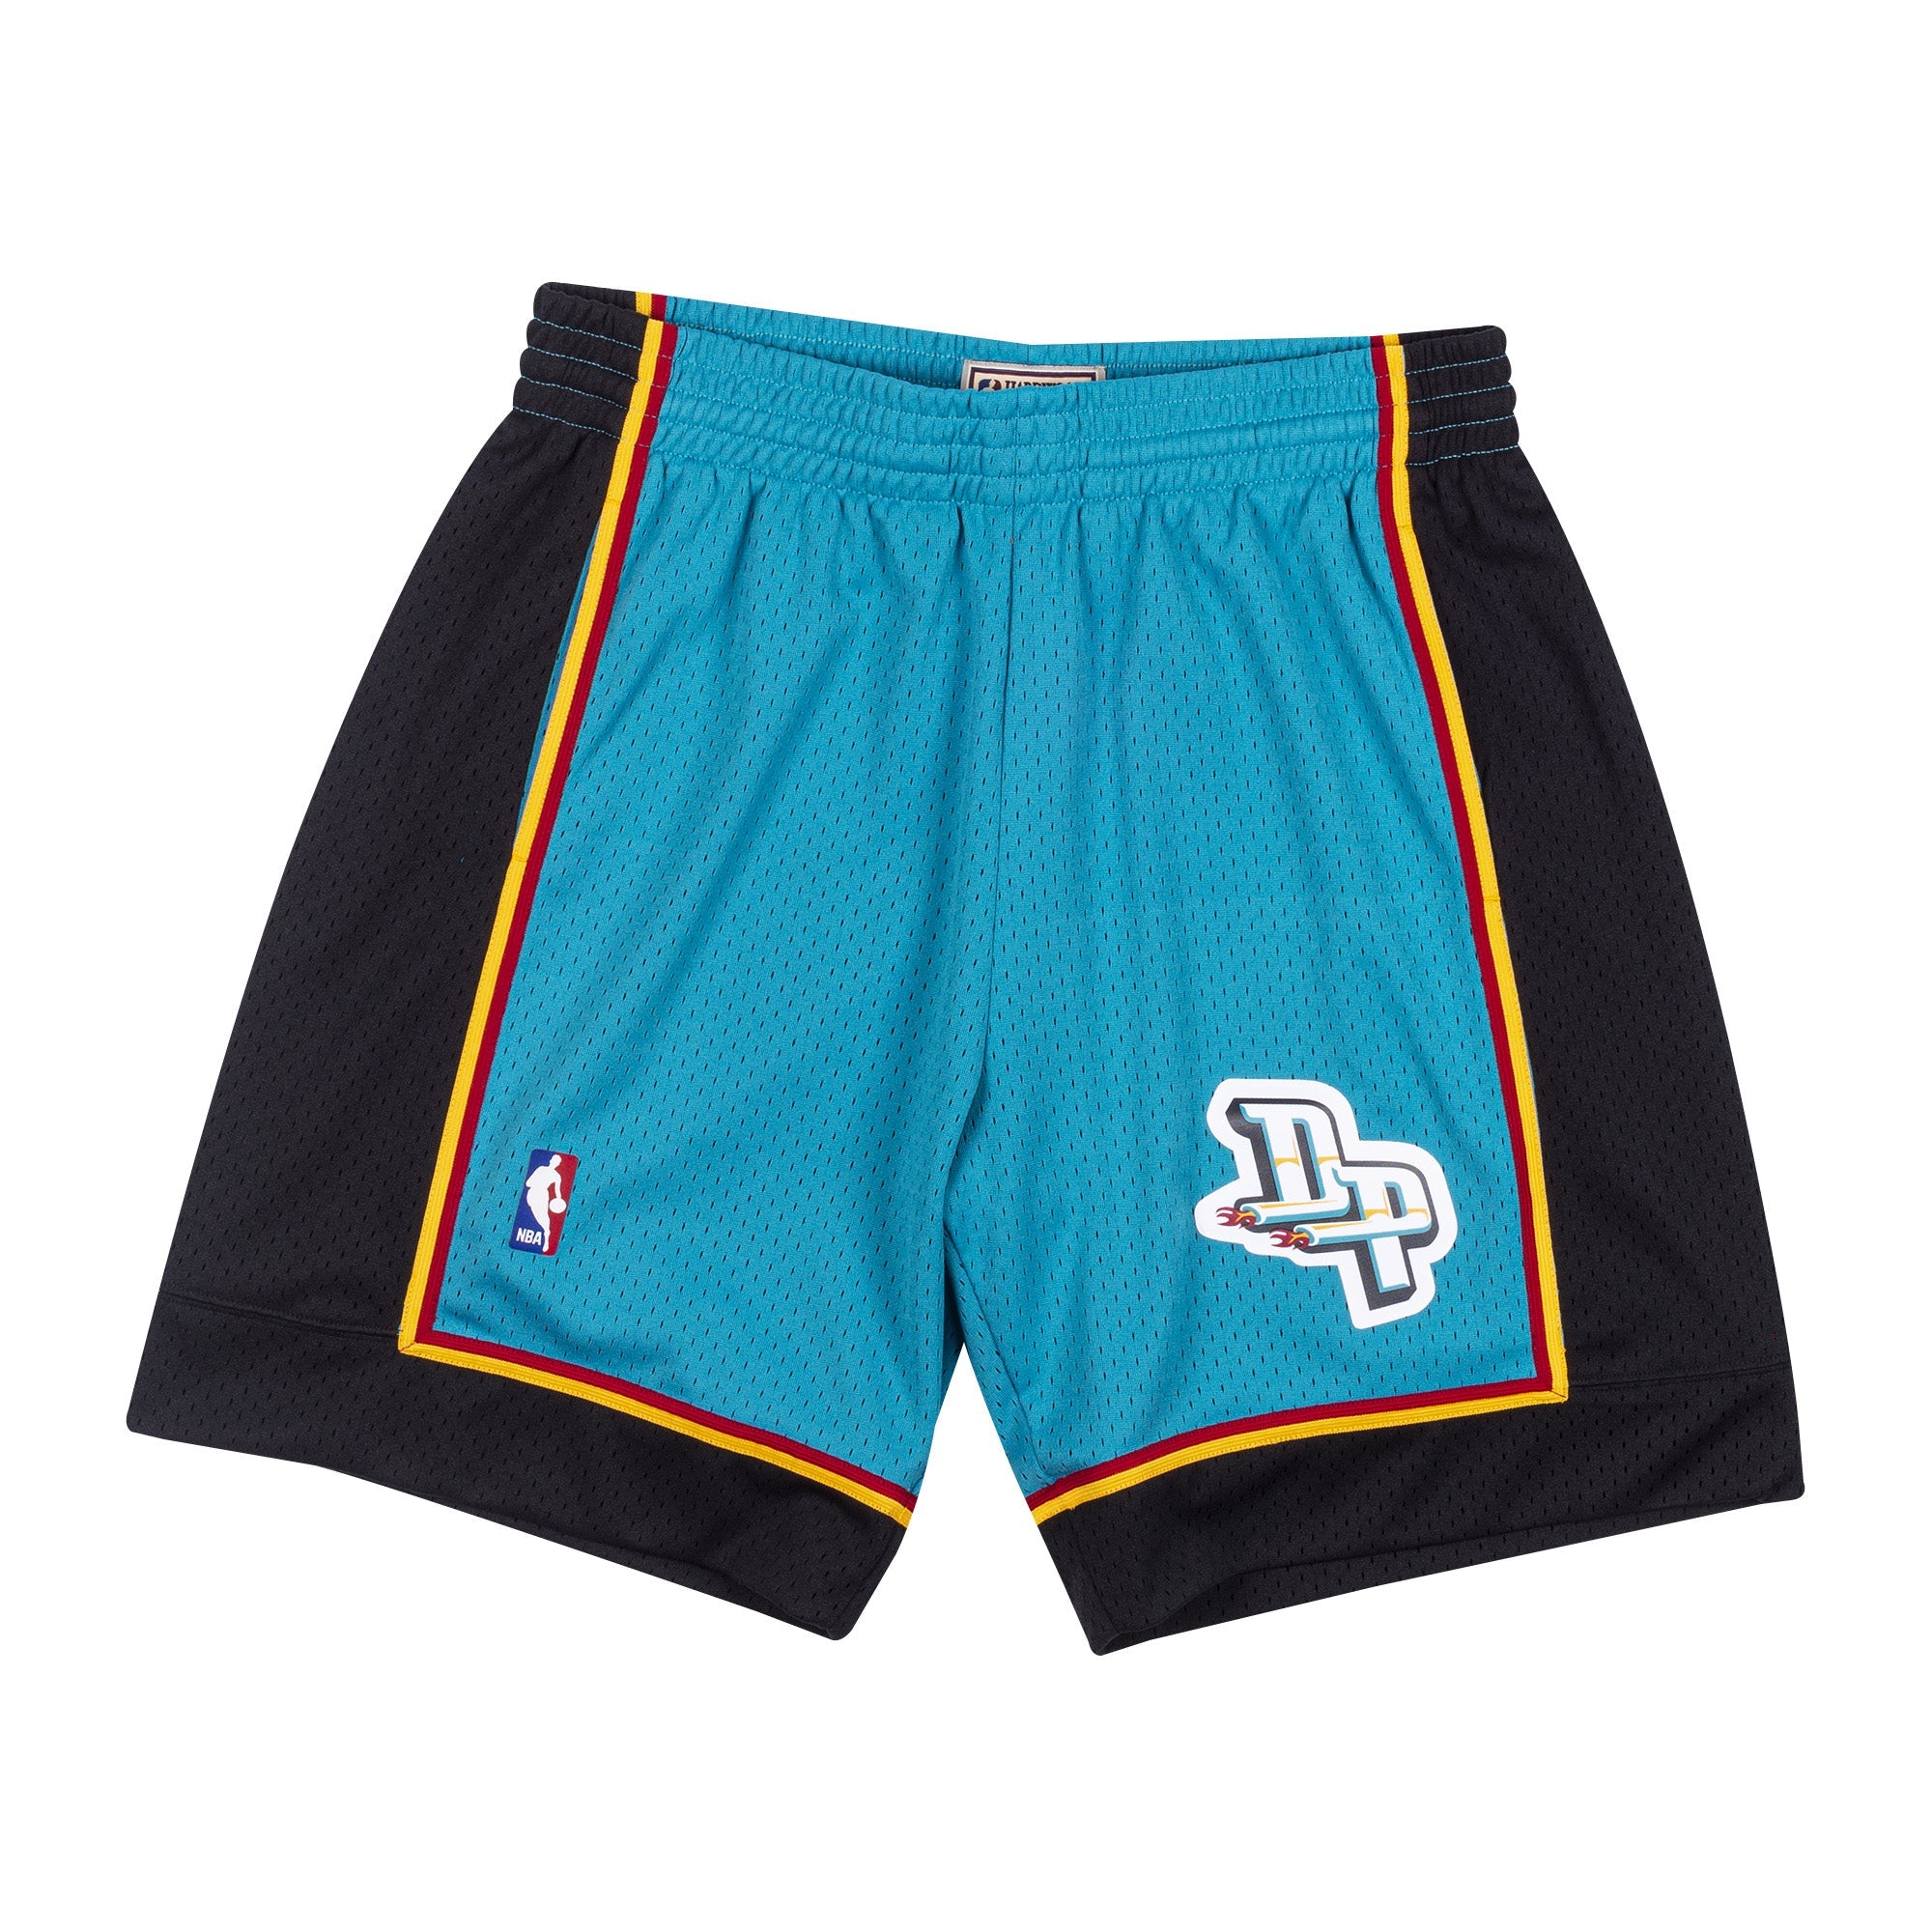 BASKETBALL JERSEY WORLD - 🔥 FIRED UP! Teal era Detroit Pistons Swingman  shorts out now! 🏀 Shop Pistons throwback shorts here